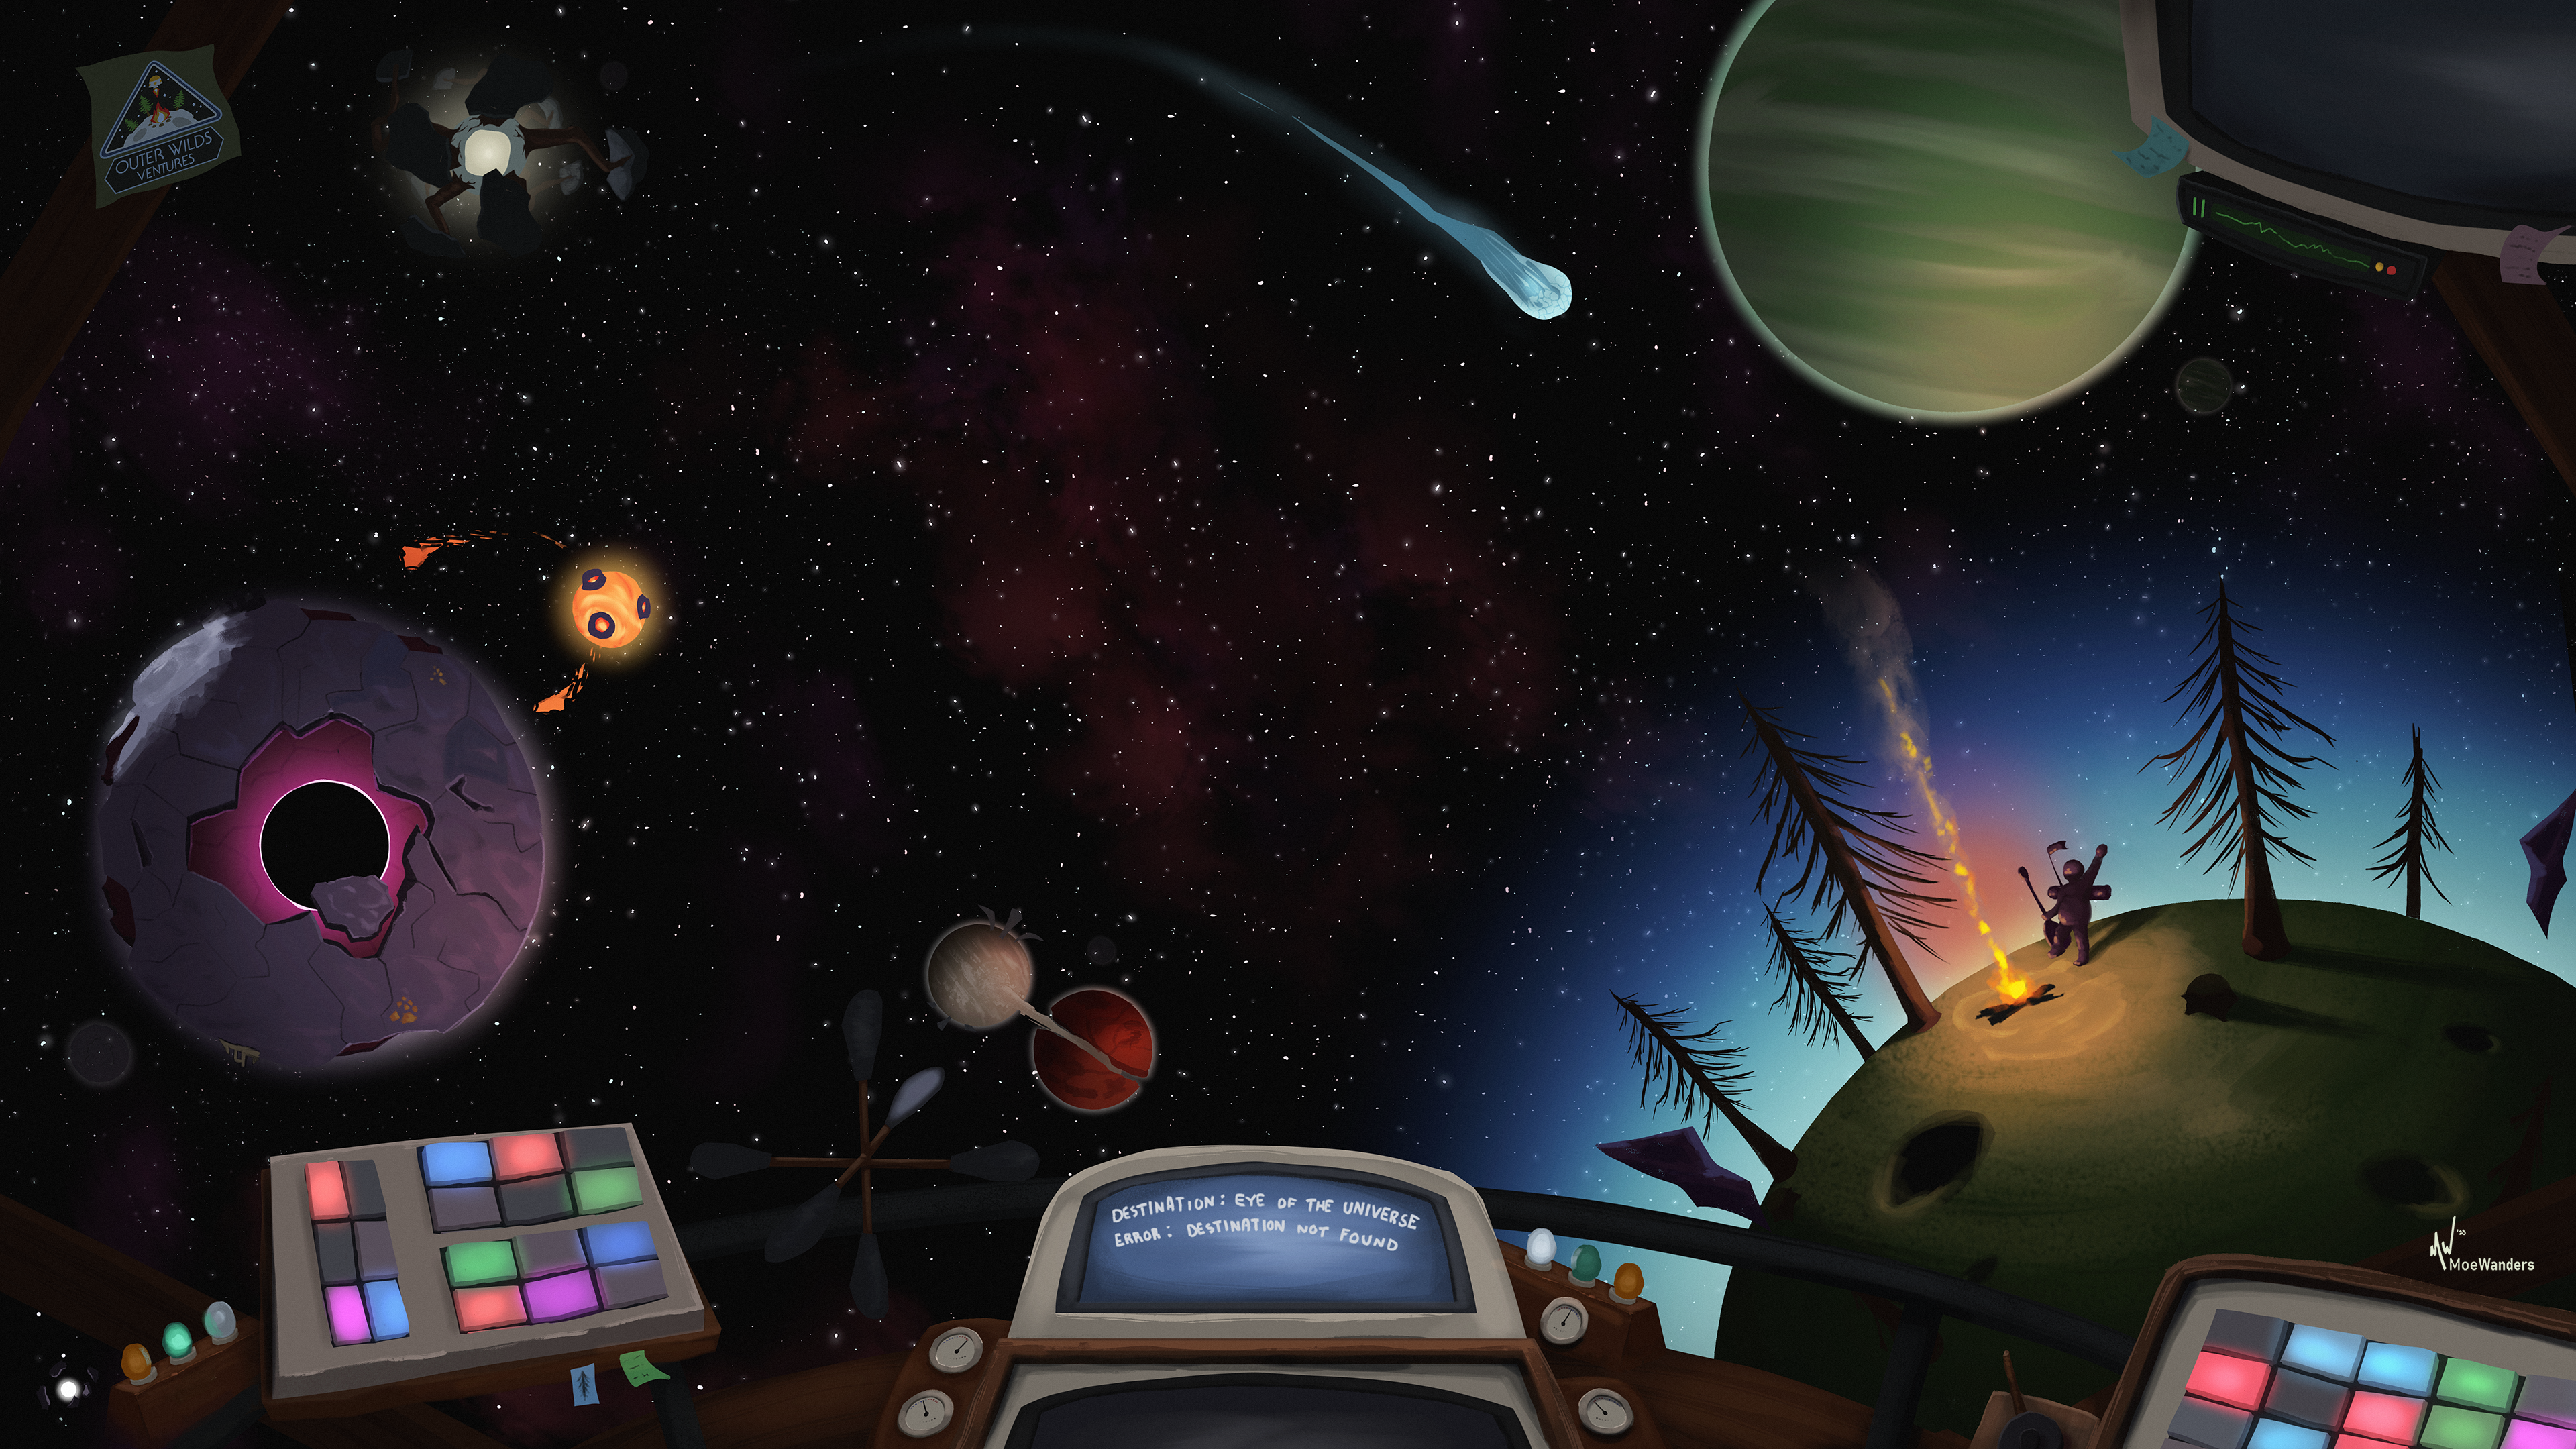 Outer Wilds Wallpaper I made for the new IOS 16 What do you think  r outerwilds